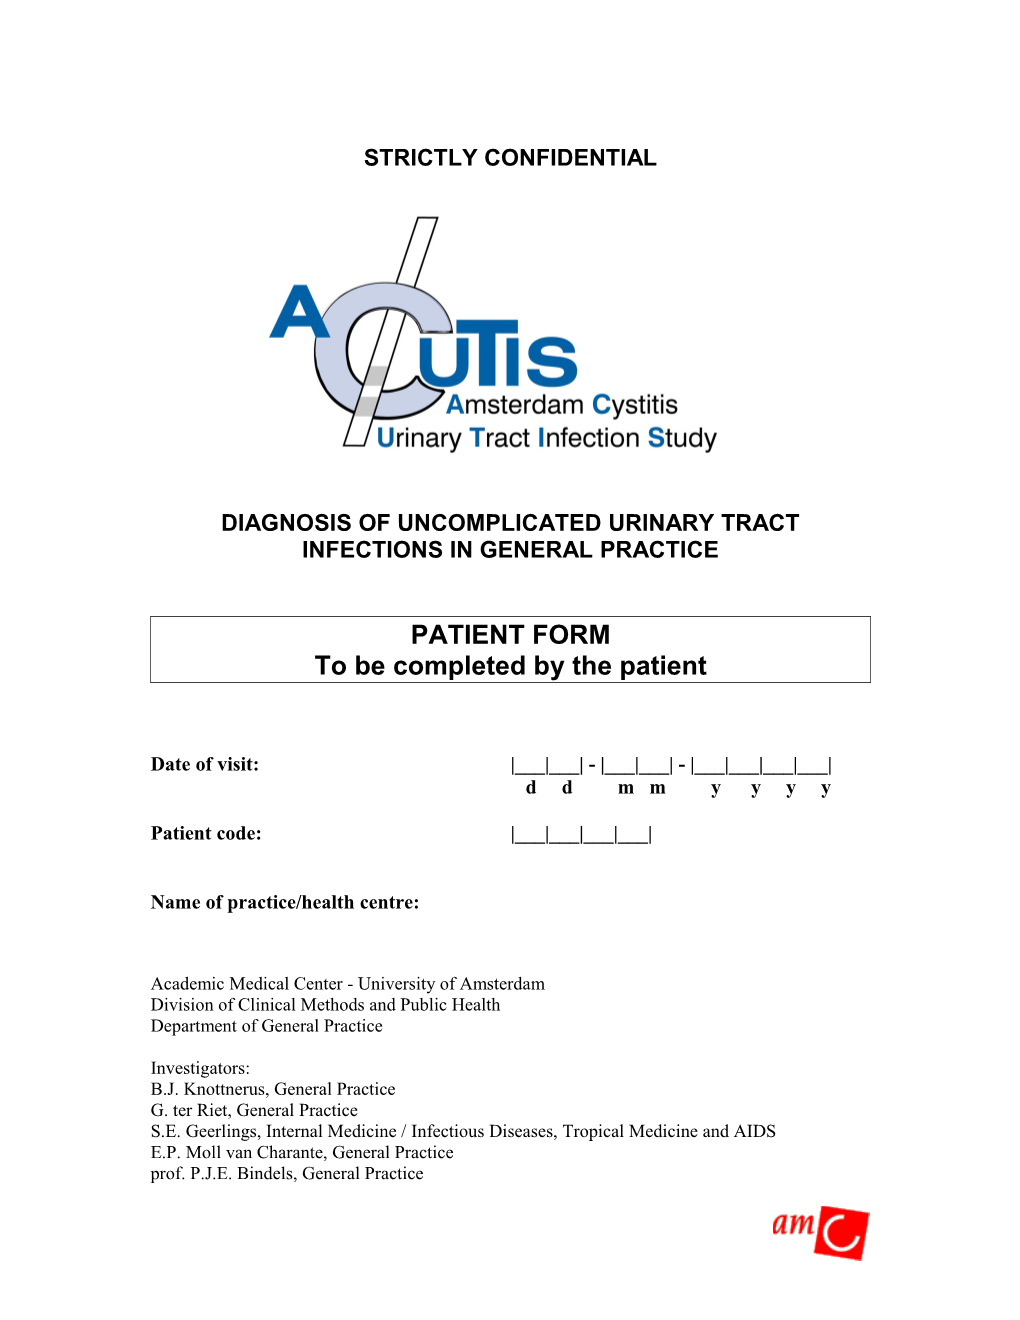 Diagnosis of Uncomplicated Urinary Tract Infections in General Practice